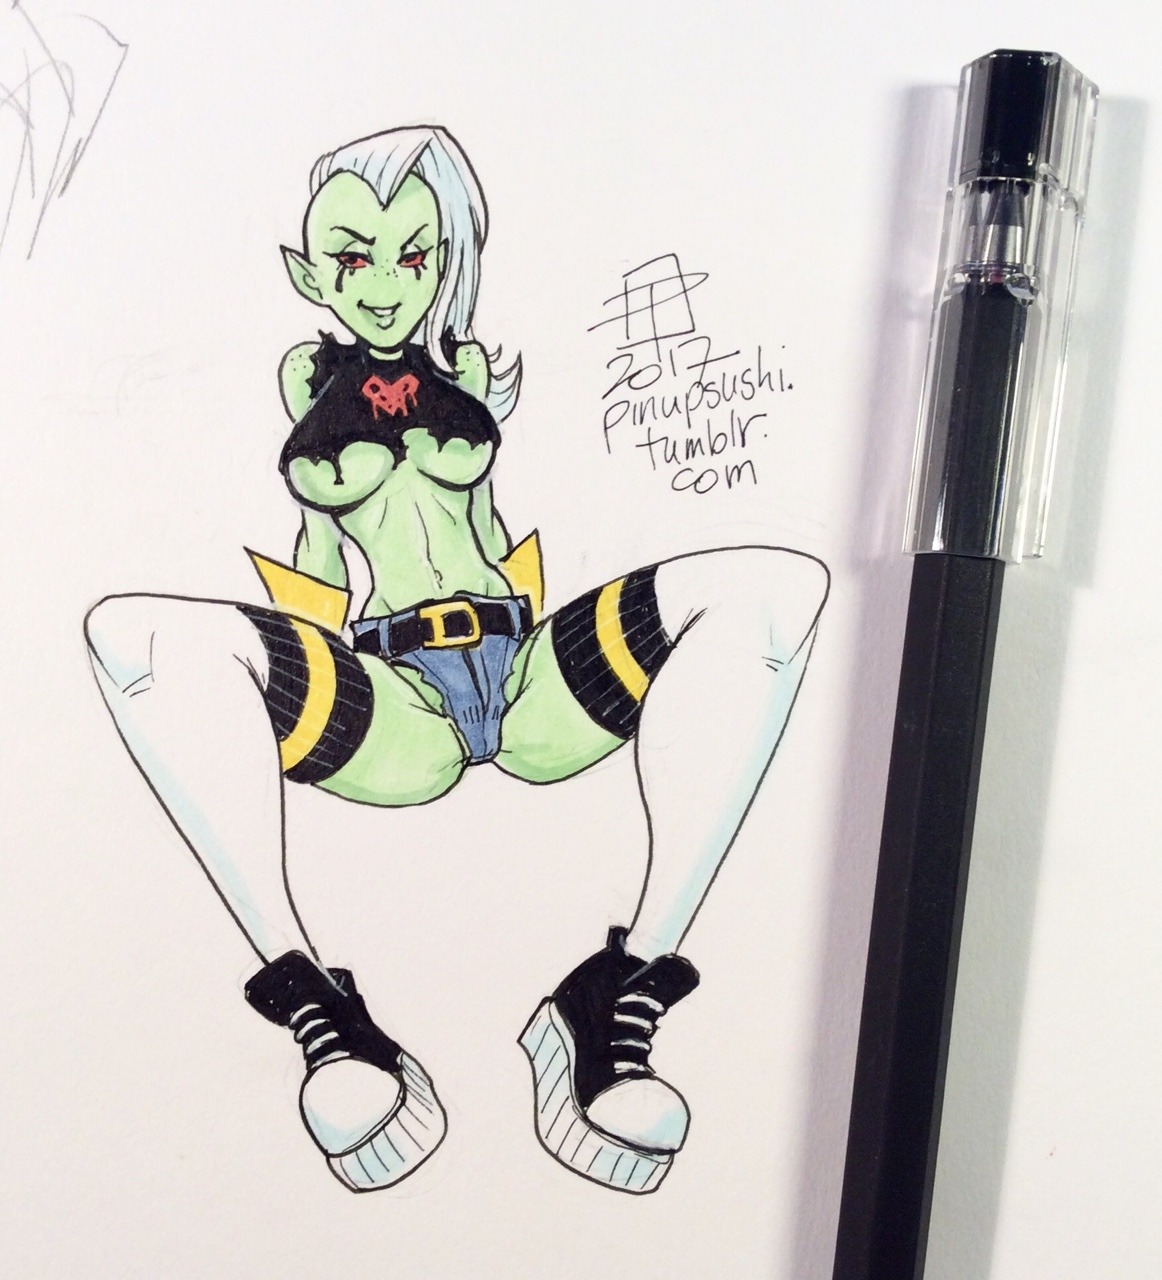 pinupsushi: Ink test #2  Lord Dominator is - and wants - the big “D”…  Trying